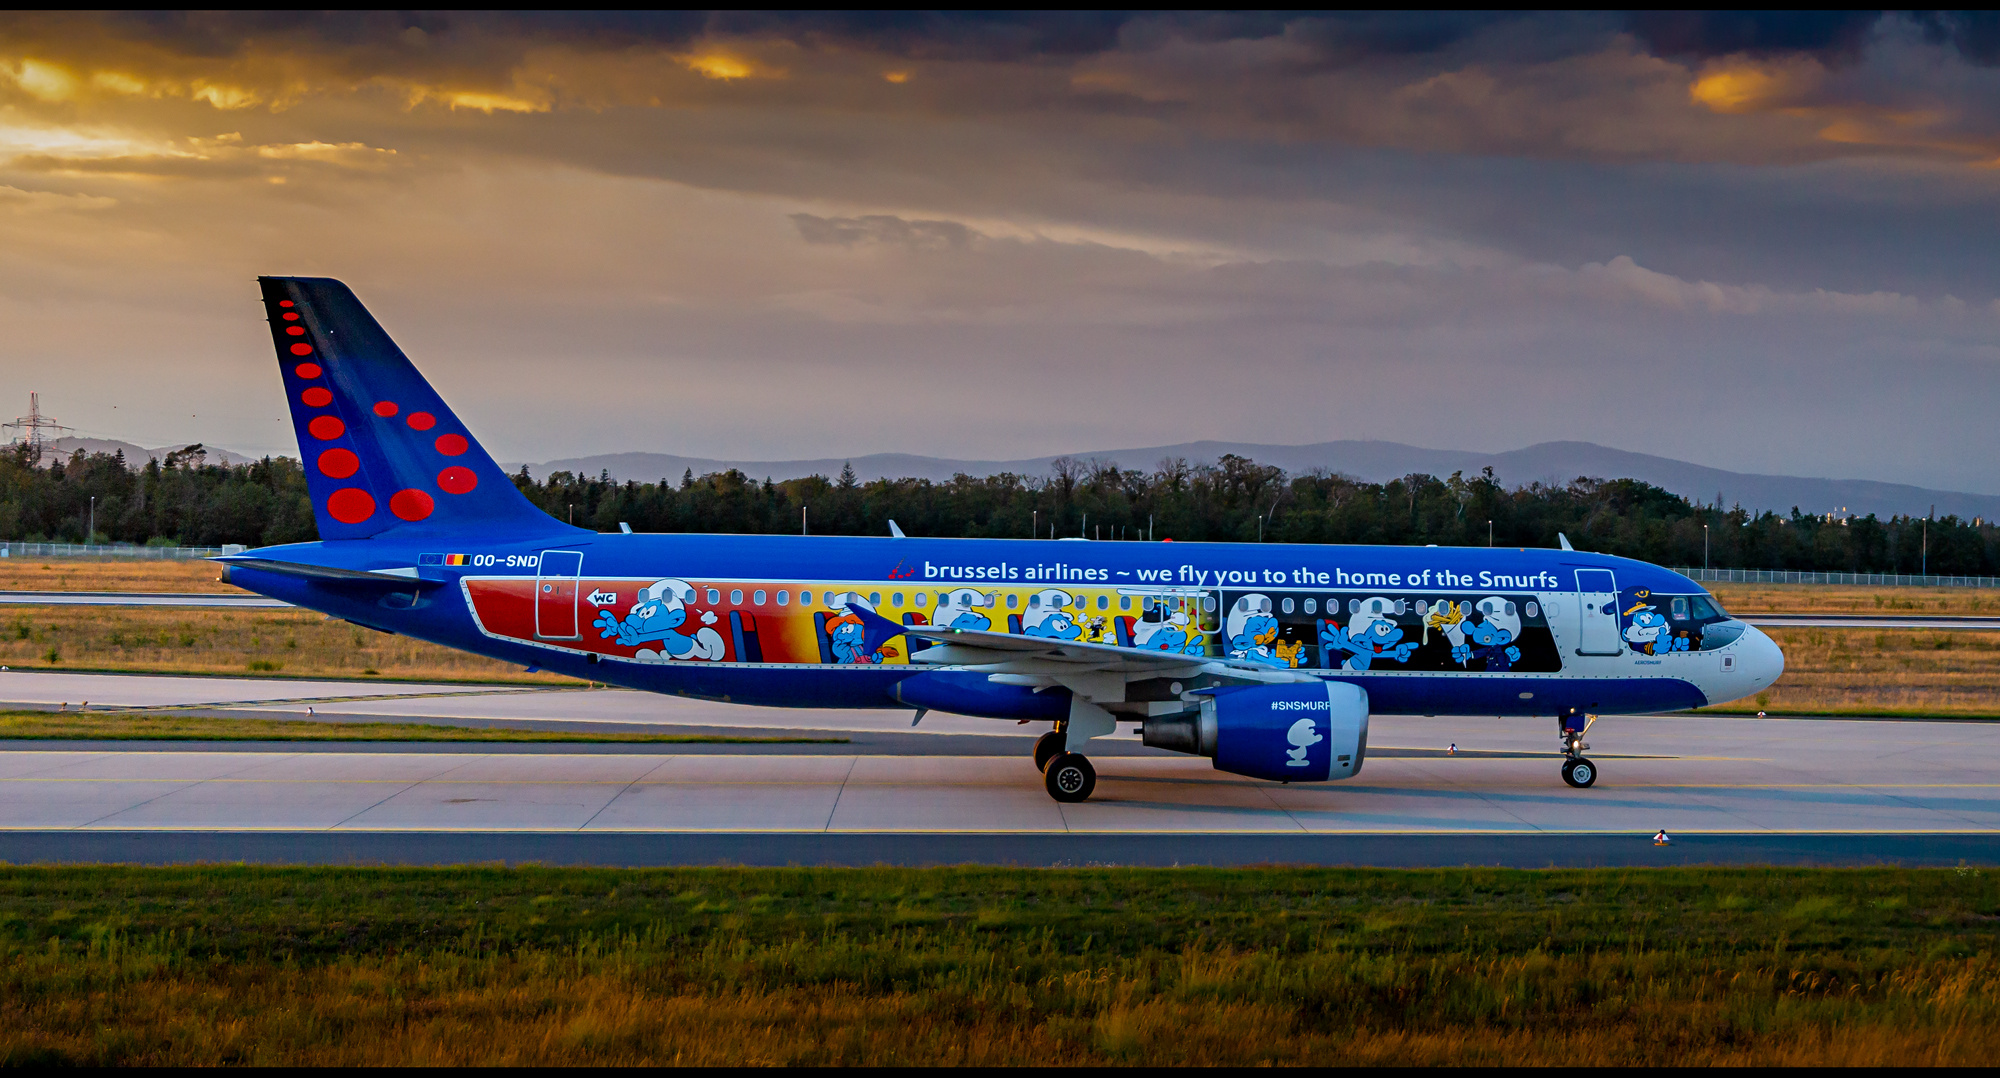 Brussels Airlines (The Smurfs Livery), Airbus A320-214